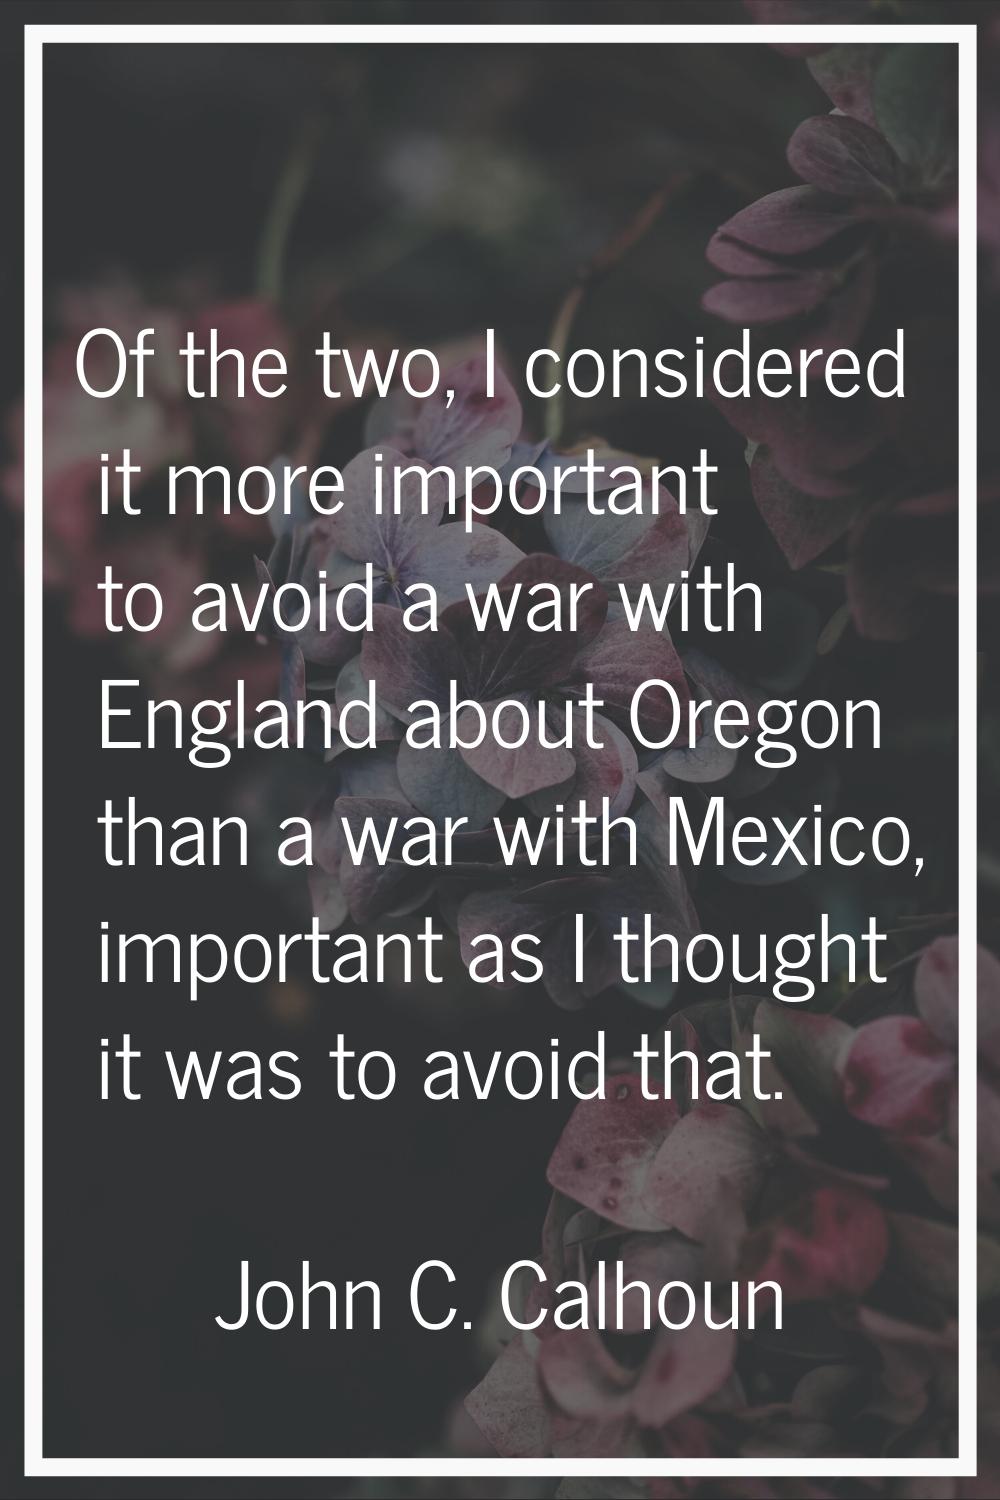 Of the two, I considered it more important to avoid a war with England about Oregon than a war with